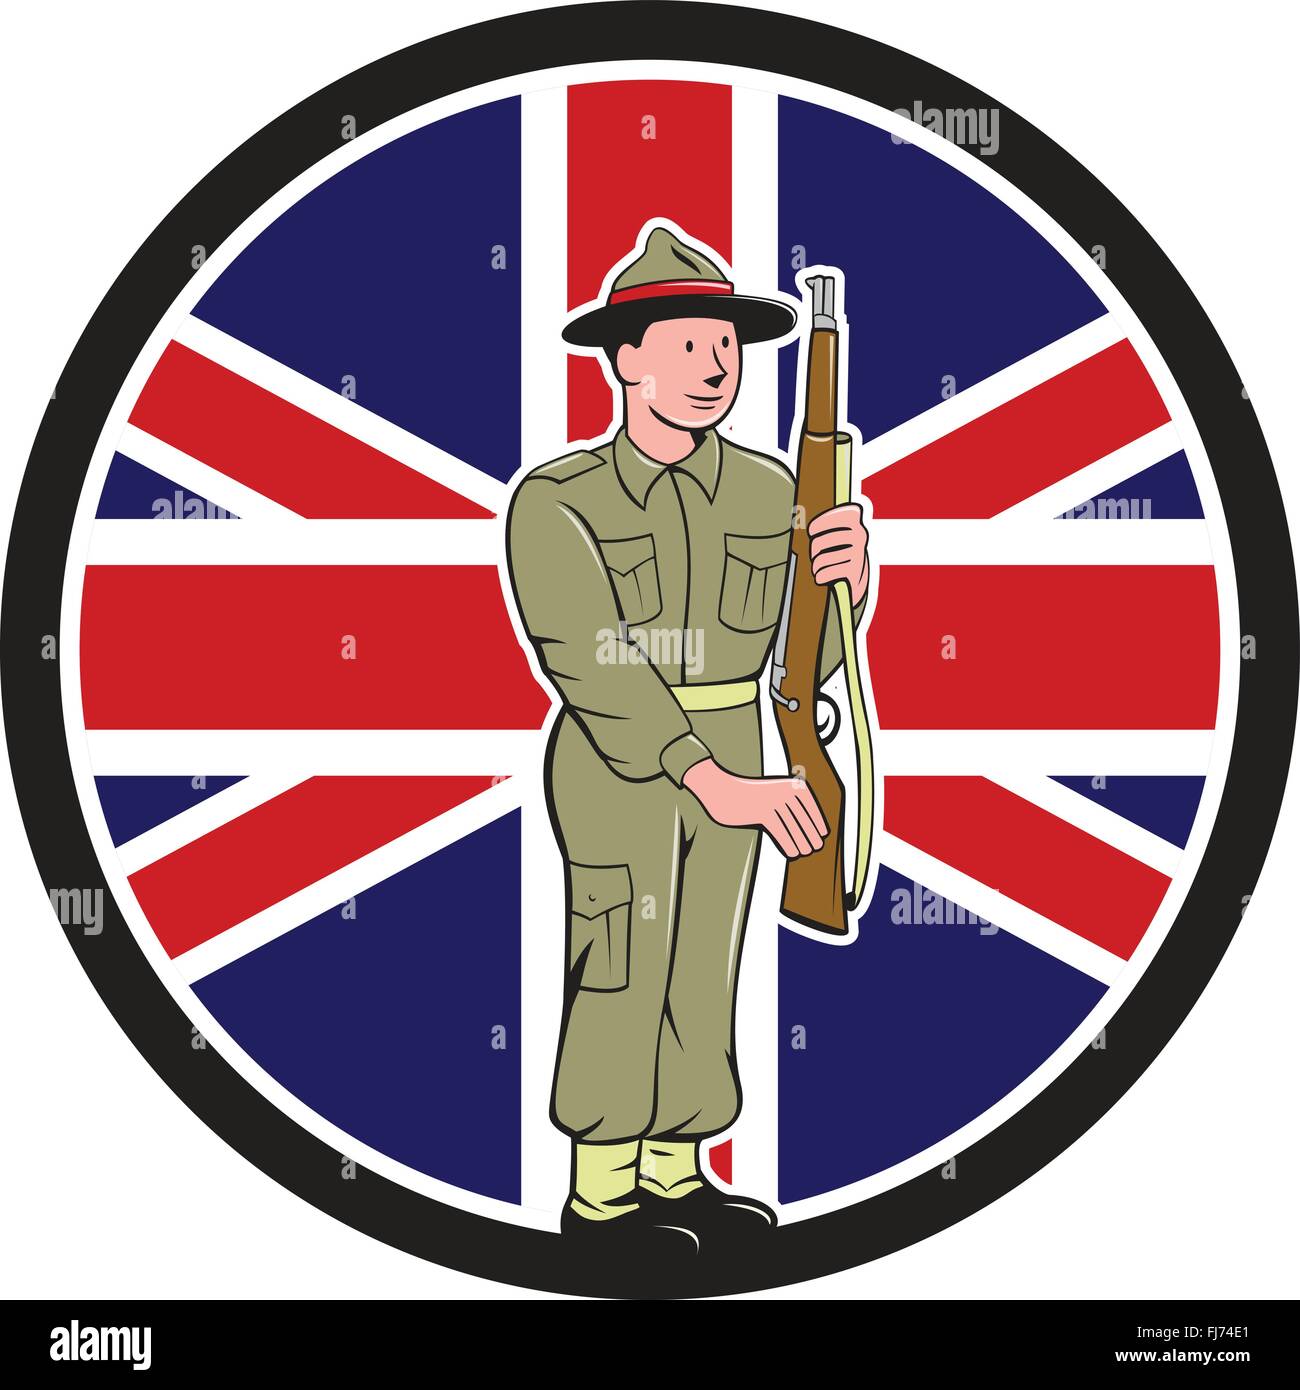 Illustration of a World War II soldier presenting arms rifle weapon for inspection with Union Jack British UK flag in the background set inside circle done in cartoon style. Stock Vector